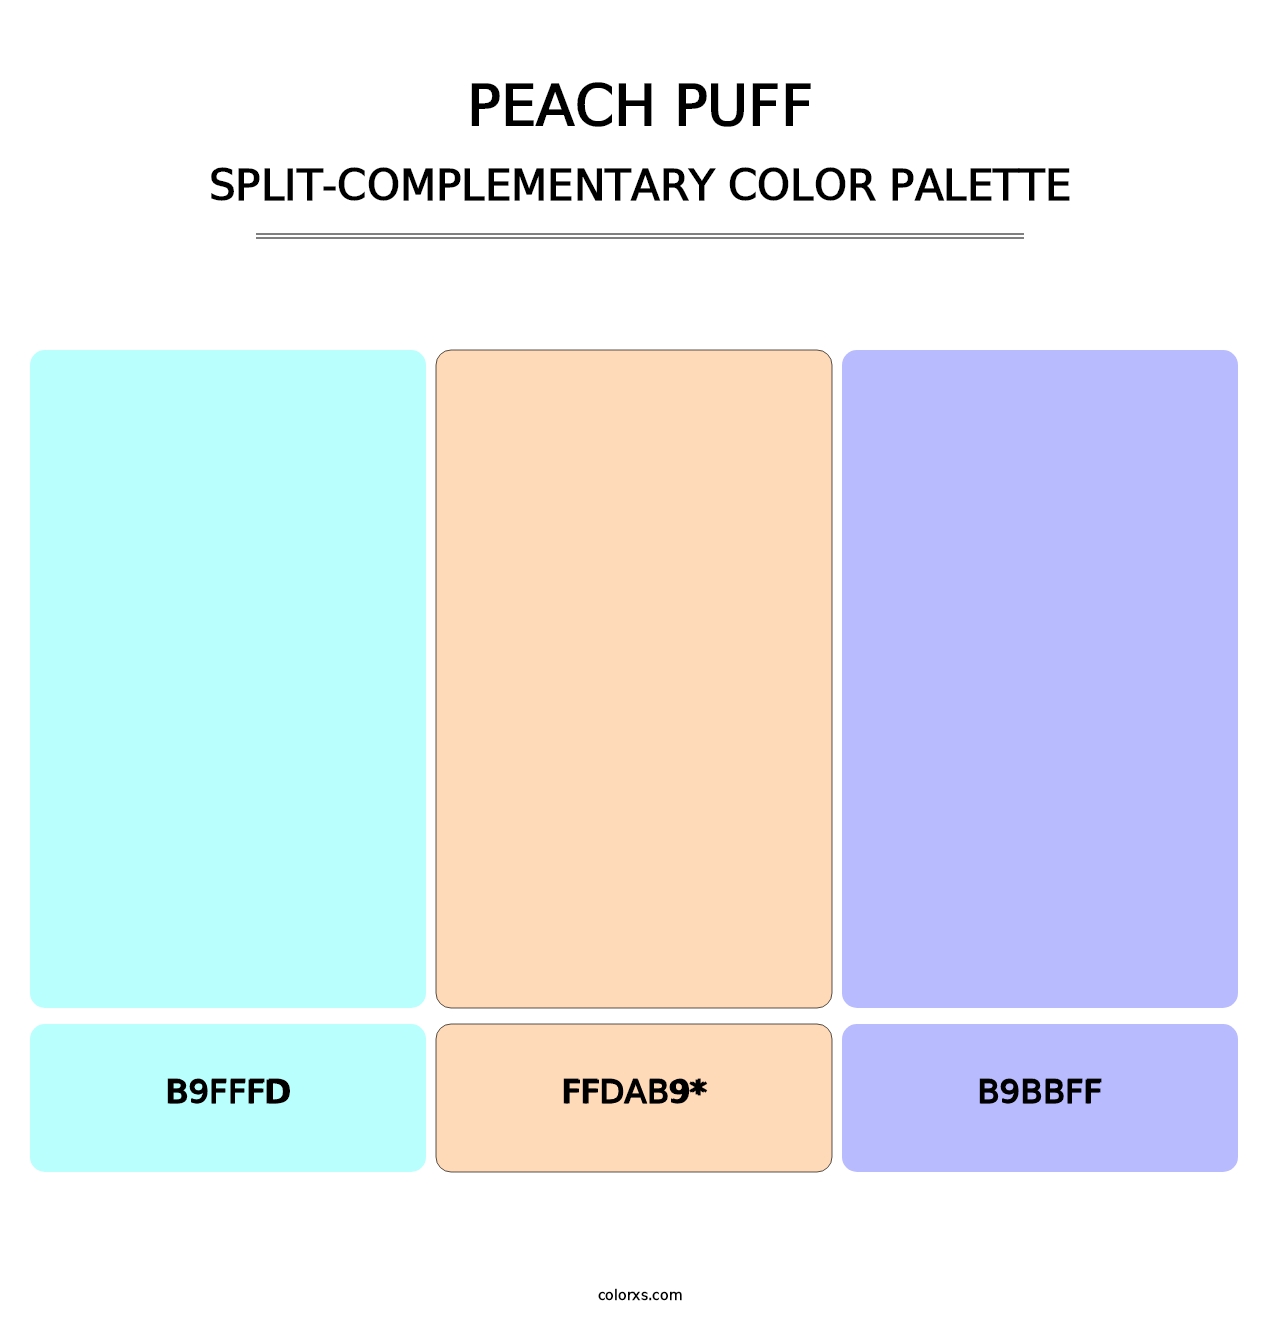 Peach Puff - Split-Complementary Color Palette